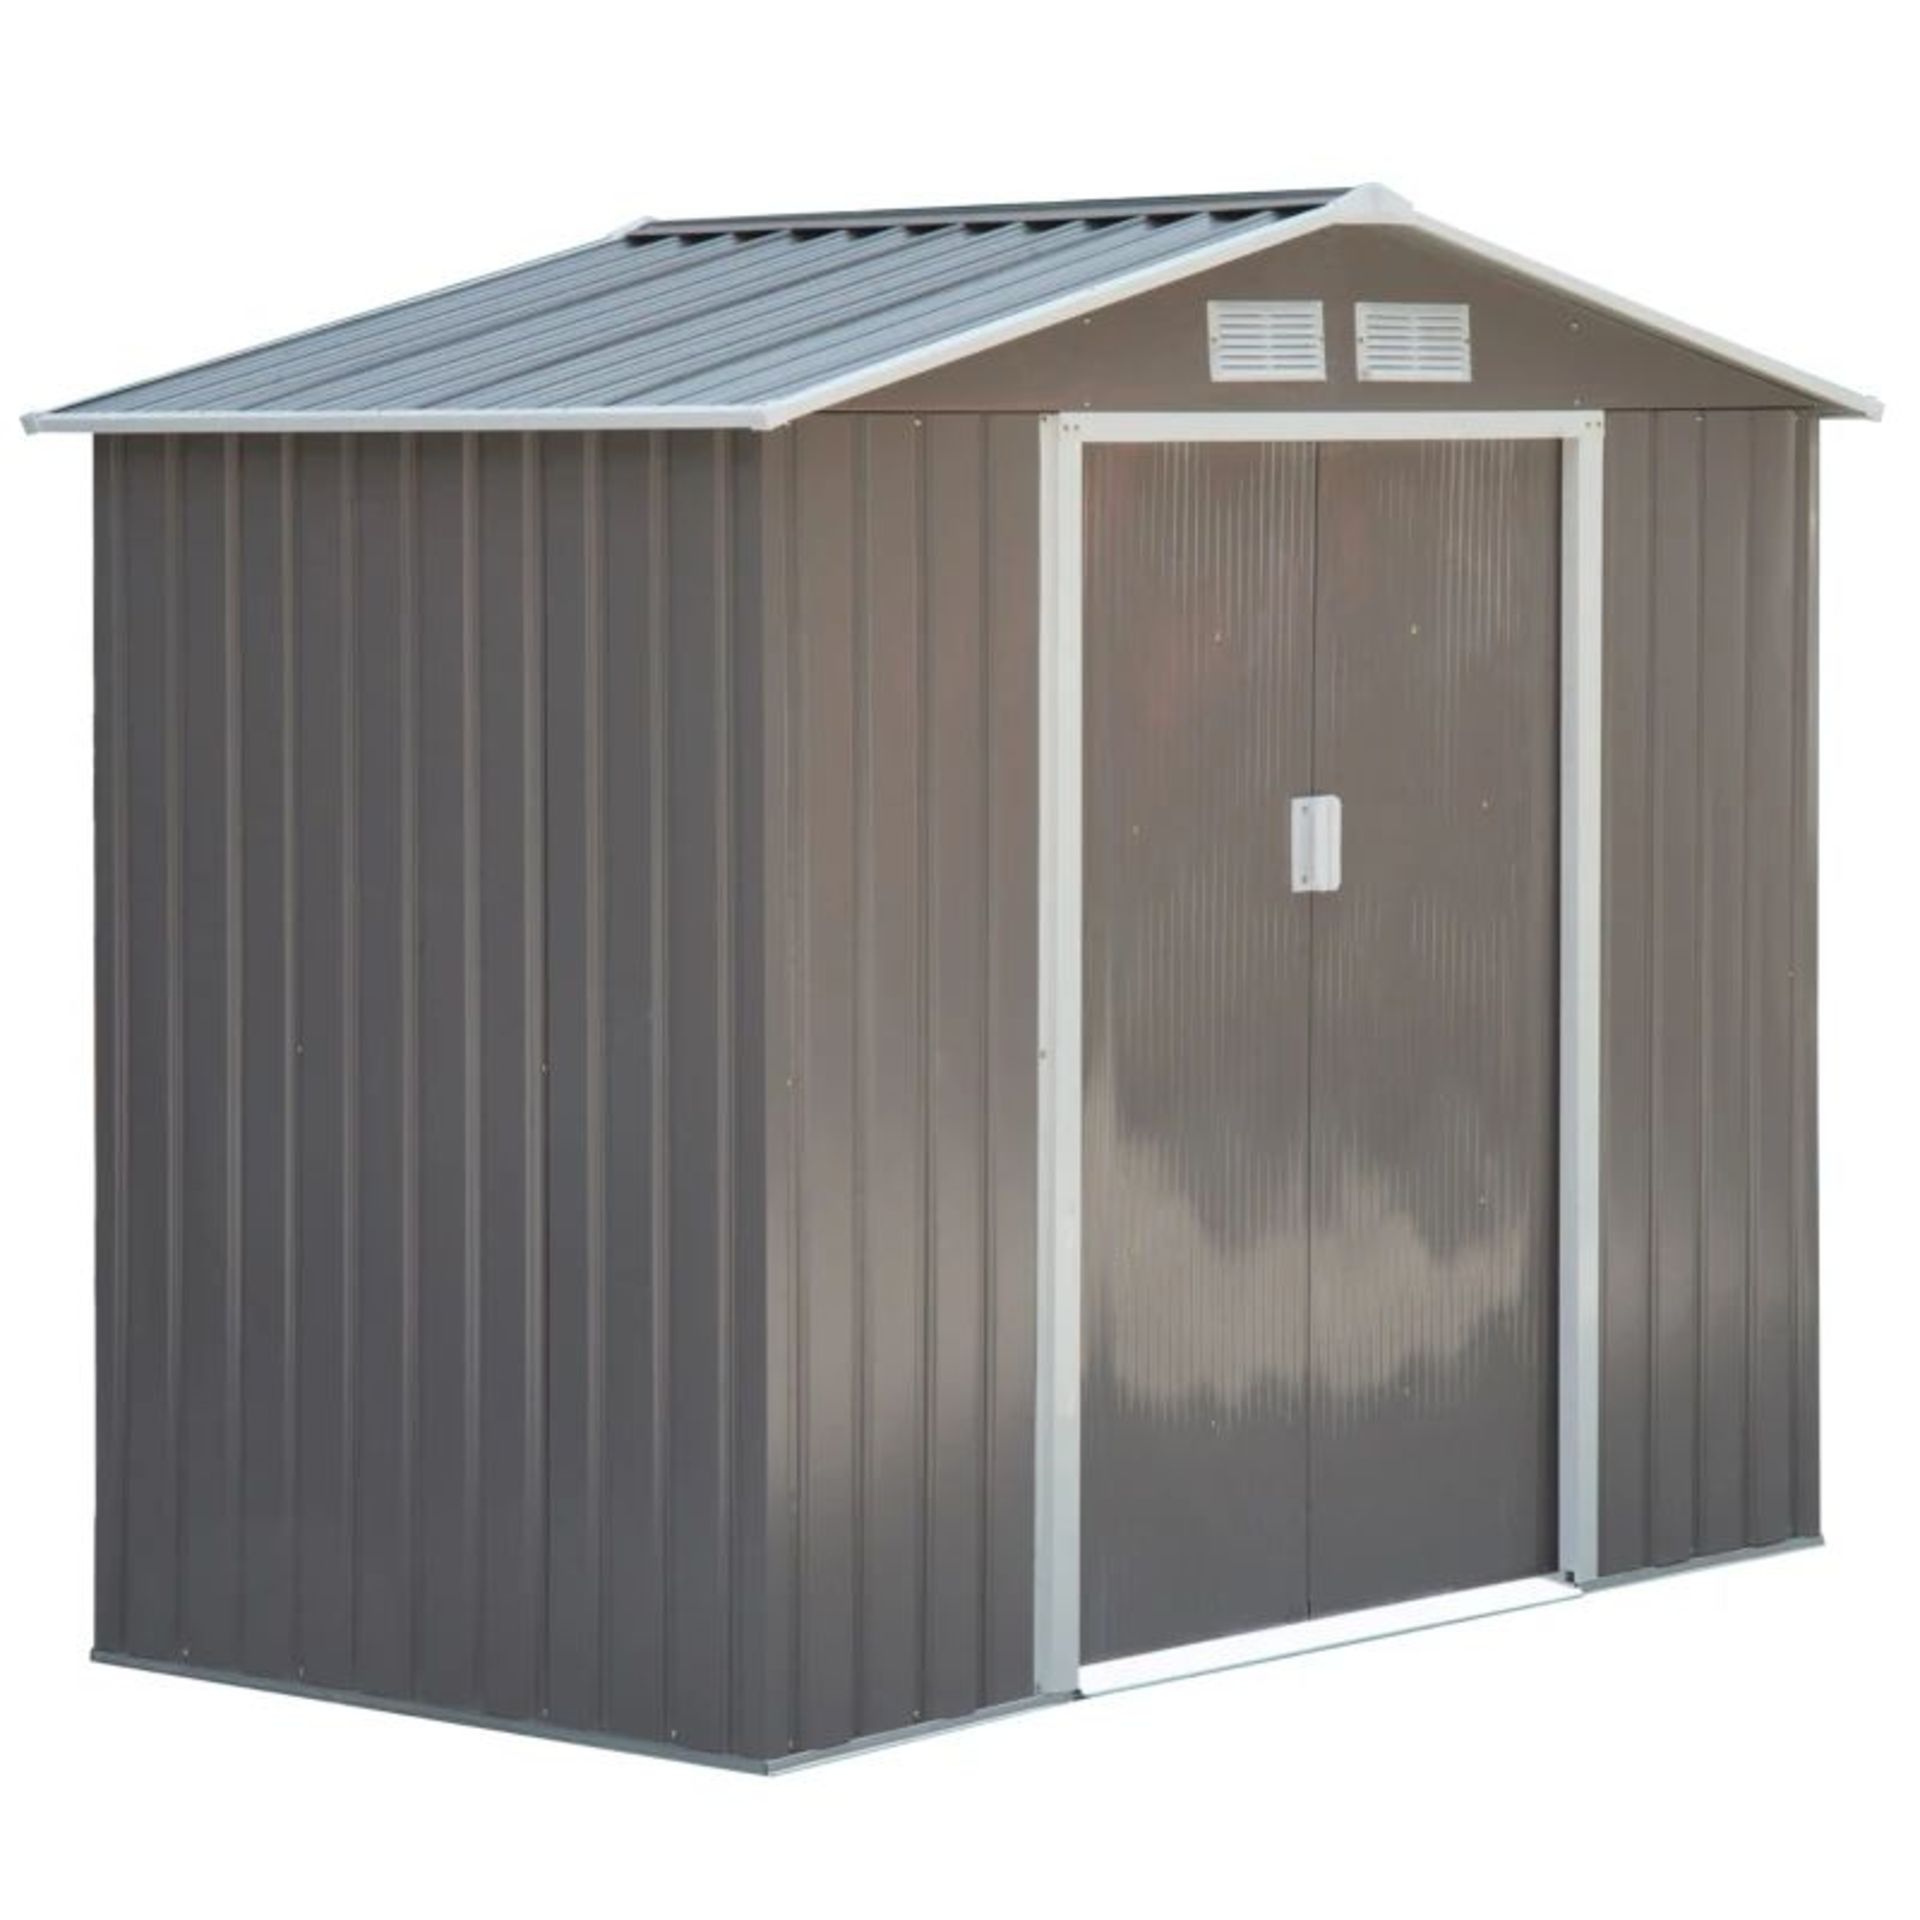 7ft x 4ft Lockable Garden Metal Storage Shed Storage Roofed Tool Metal Shed w/ Air Vents Steel